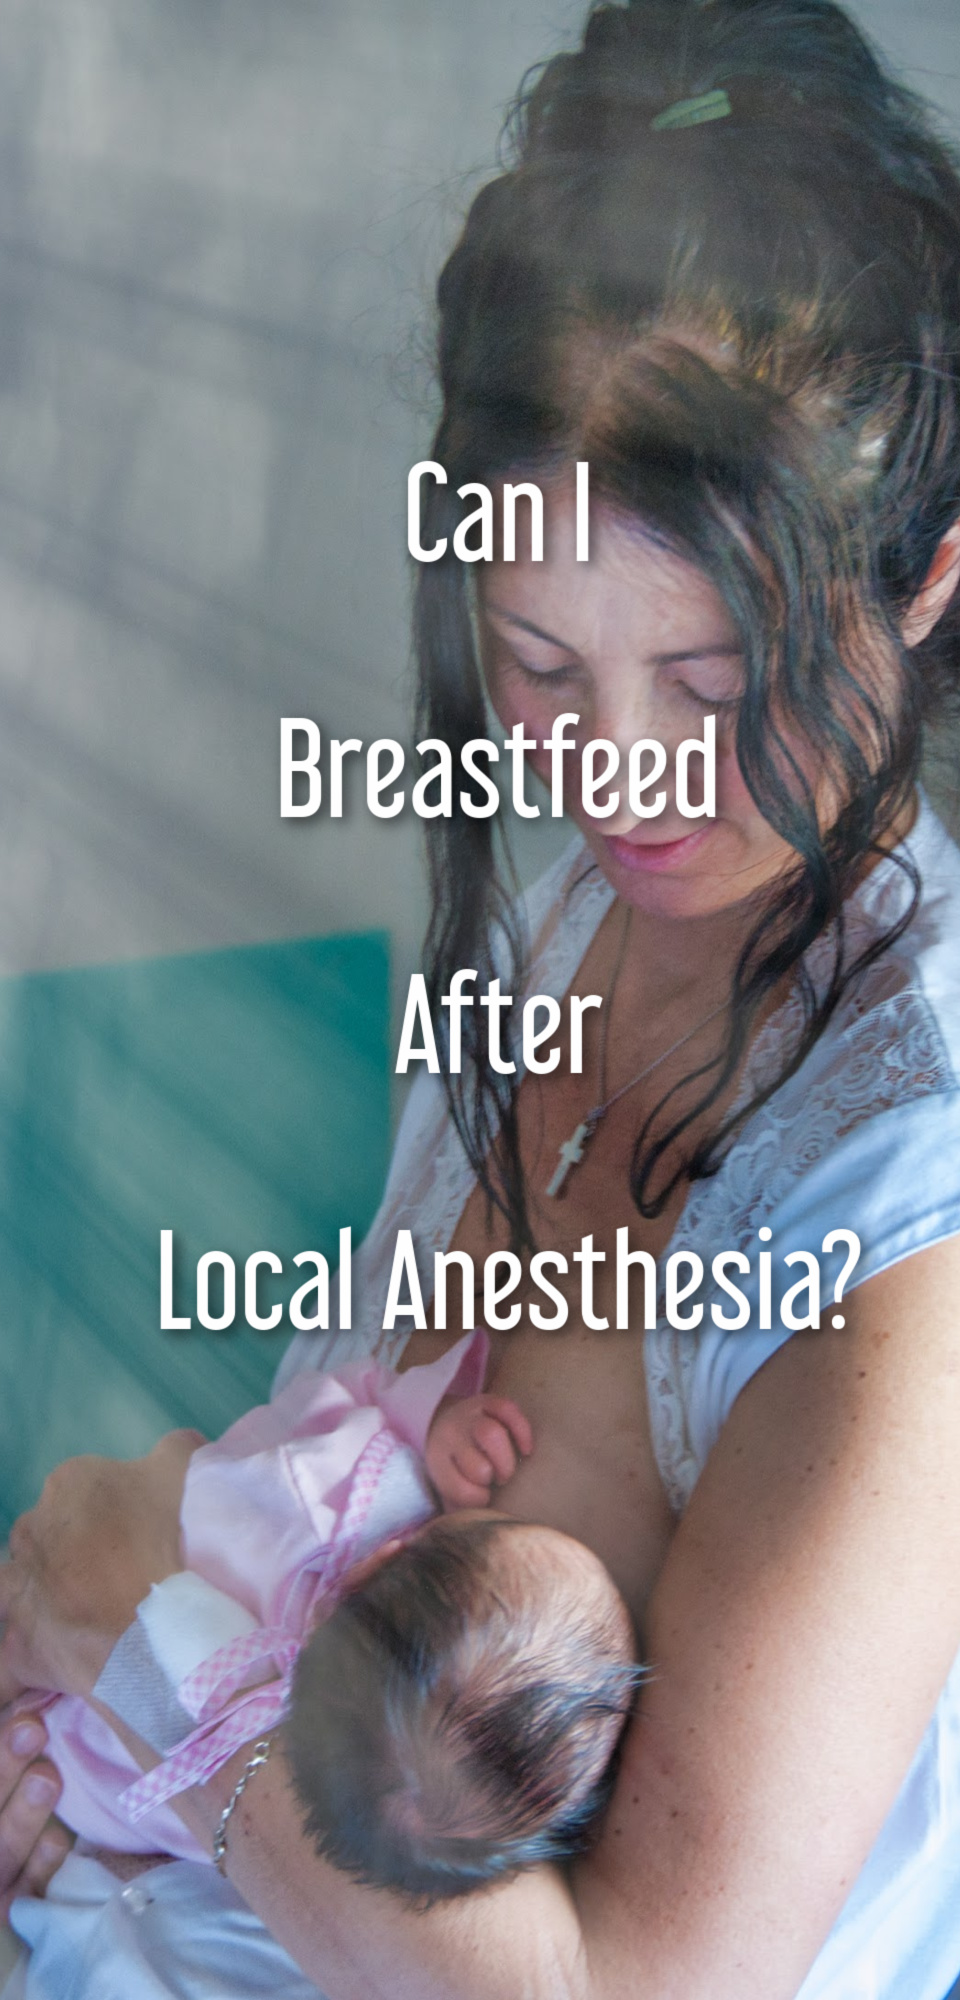 Can I Breastfeed After Local Anesthesia?